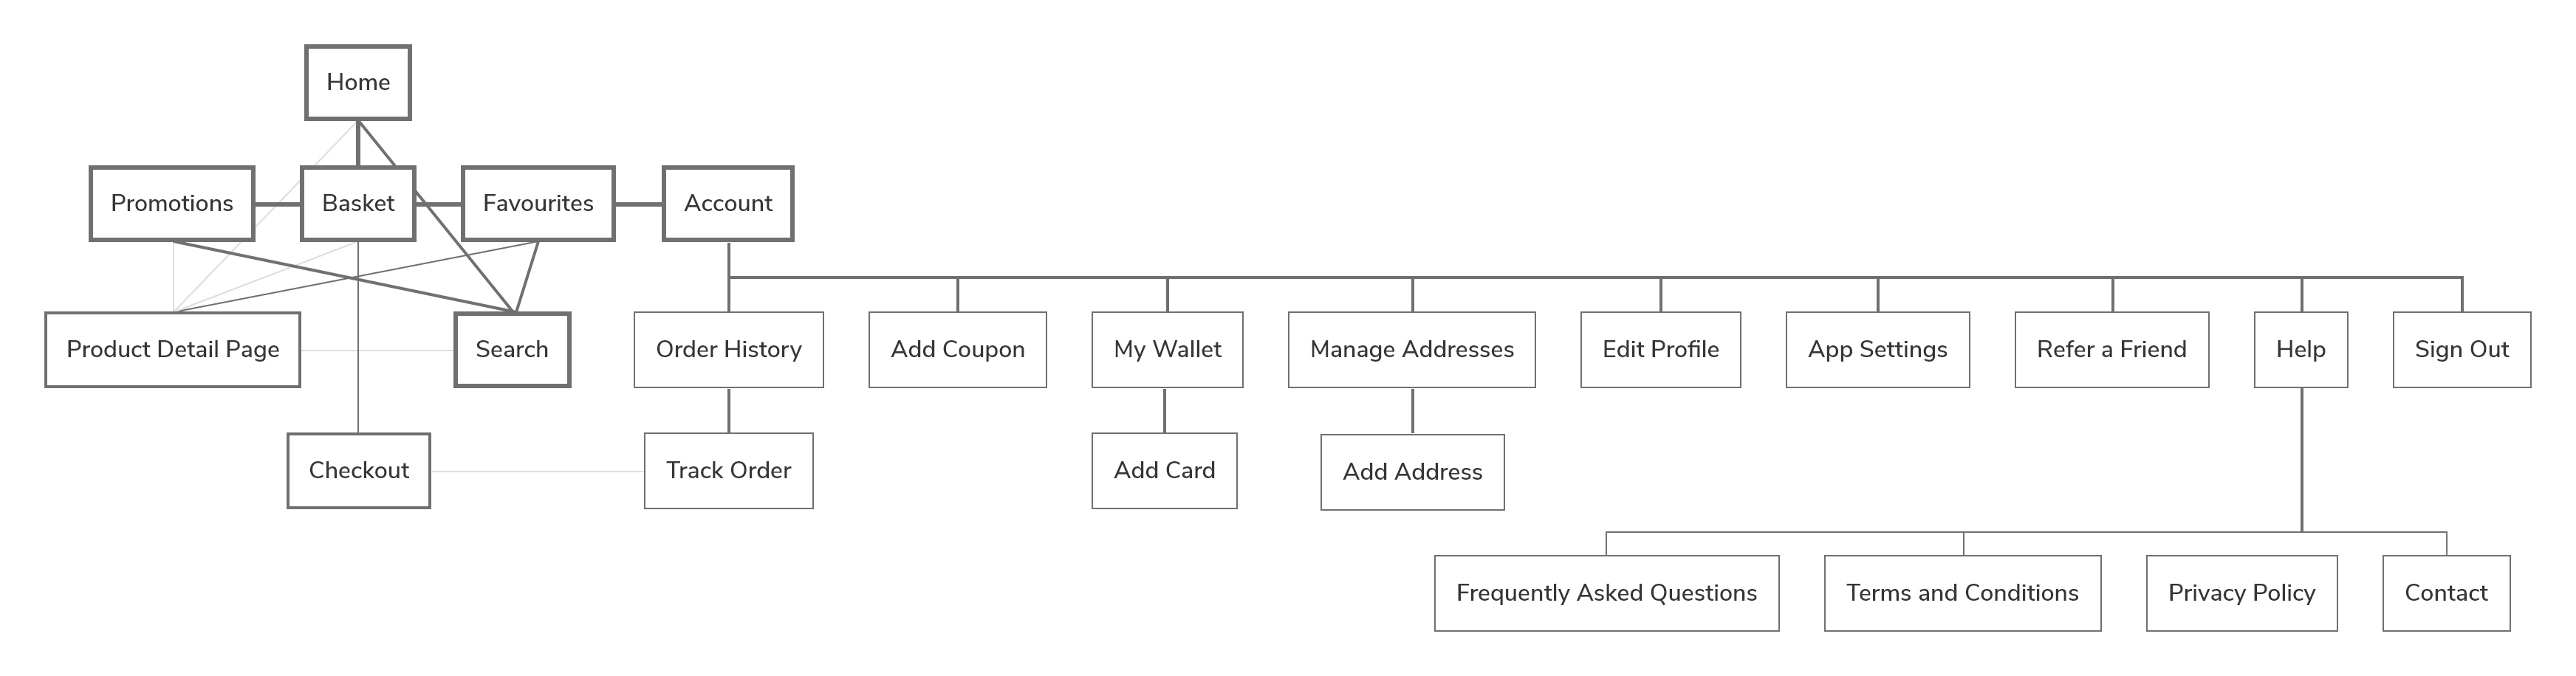 The Application Architecture Map, or the site map of the application showing the main navigation trees.